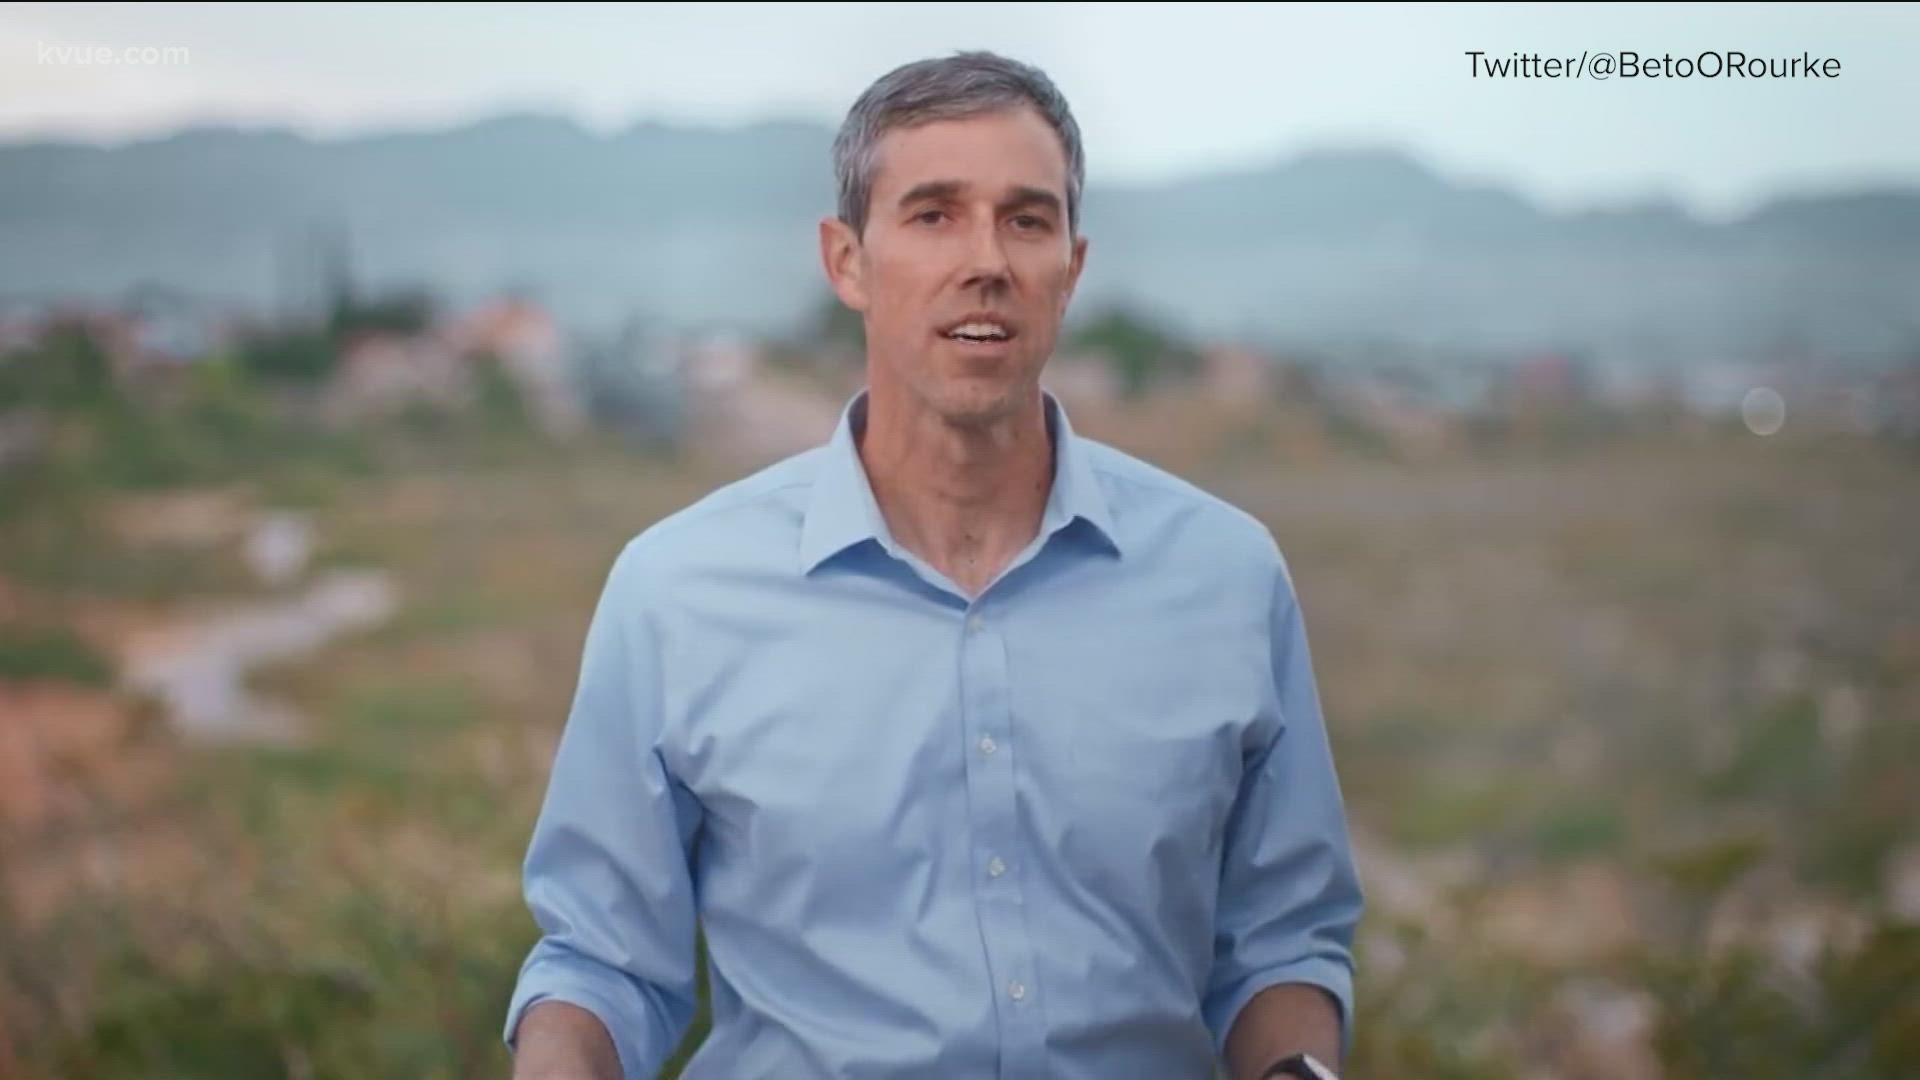 Former Congressman Beto O'Rourke is officially returning to politics with a bid for Texas' highest office.